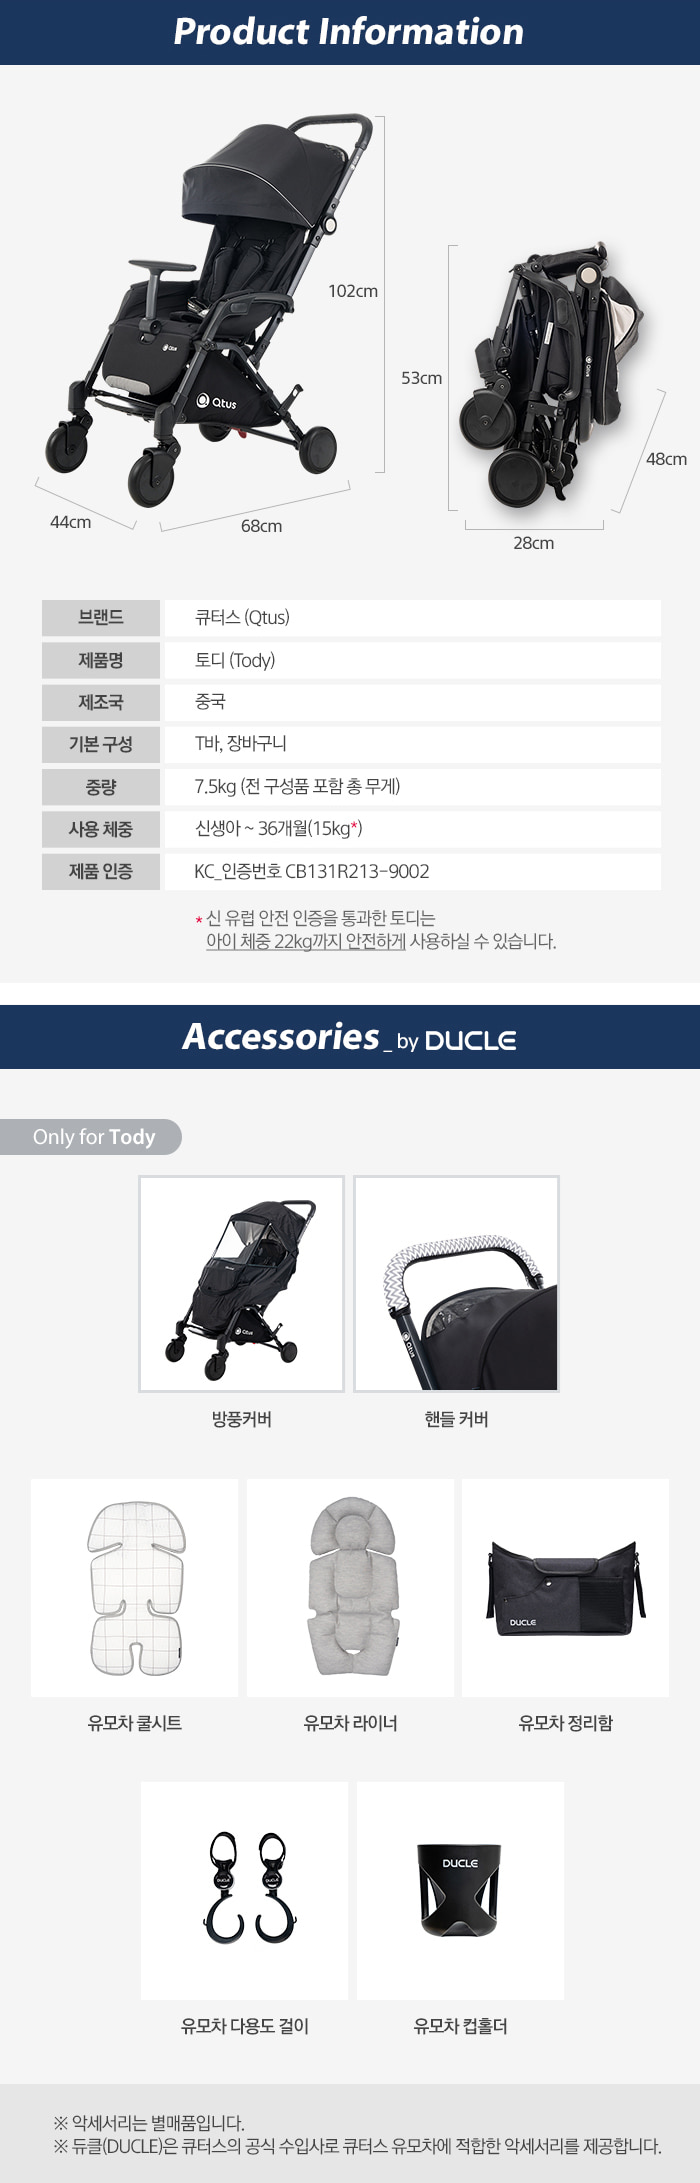 product information & acc